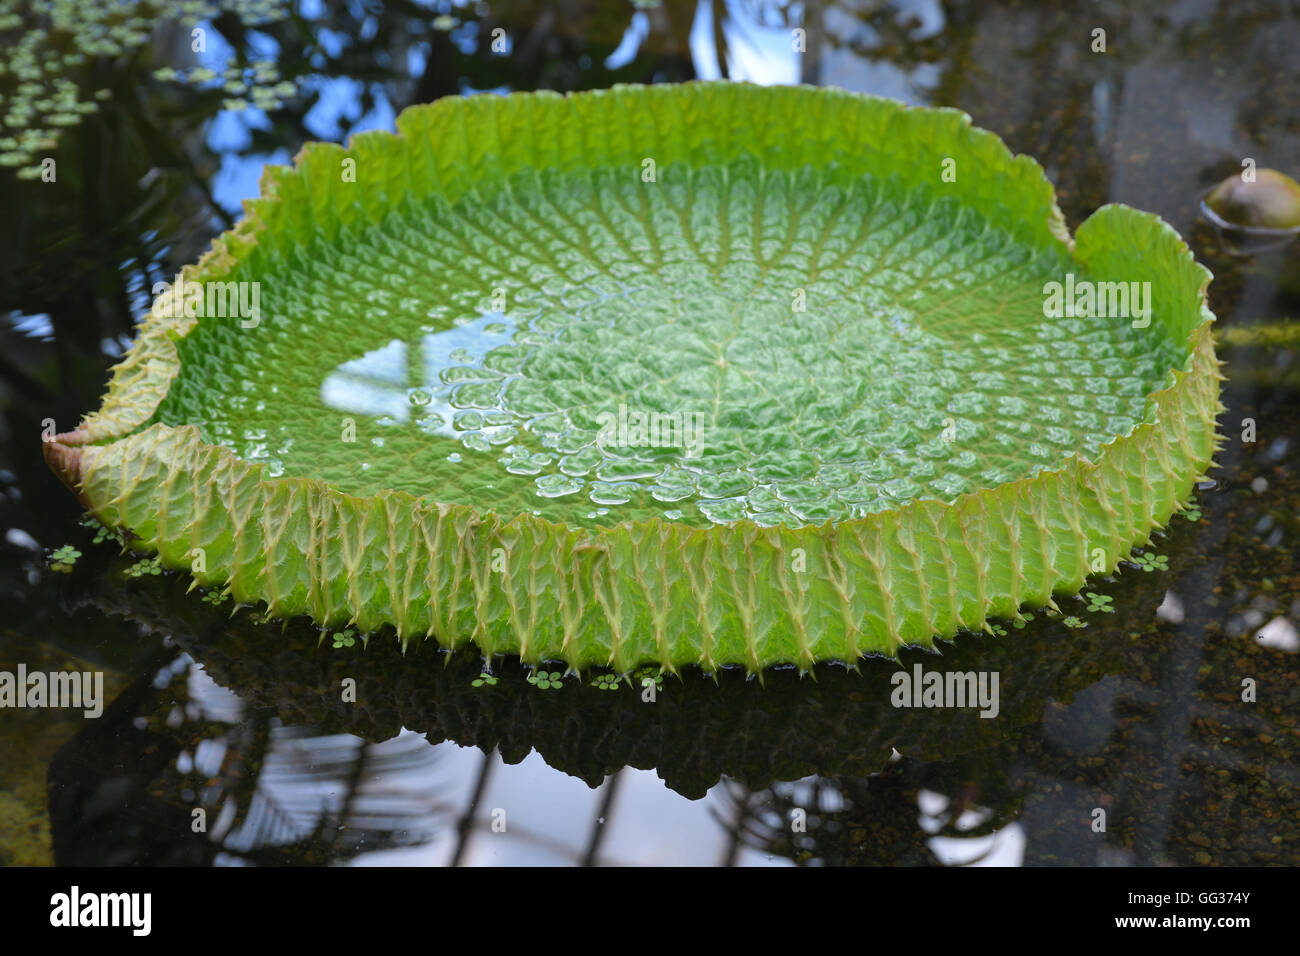 Victoria amazonica is a species of flowering plant, the largest of the Nymphaeaceae family of water lilies. Stock Photo